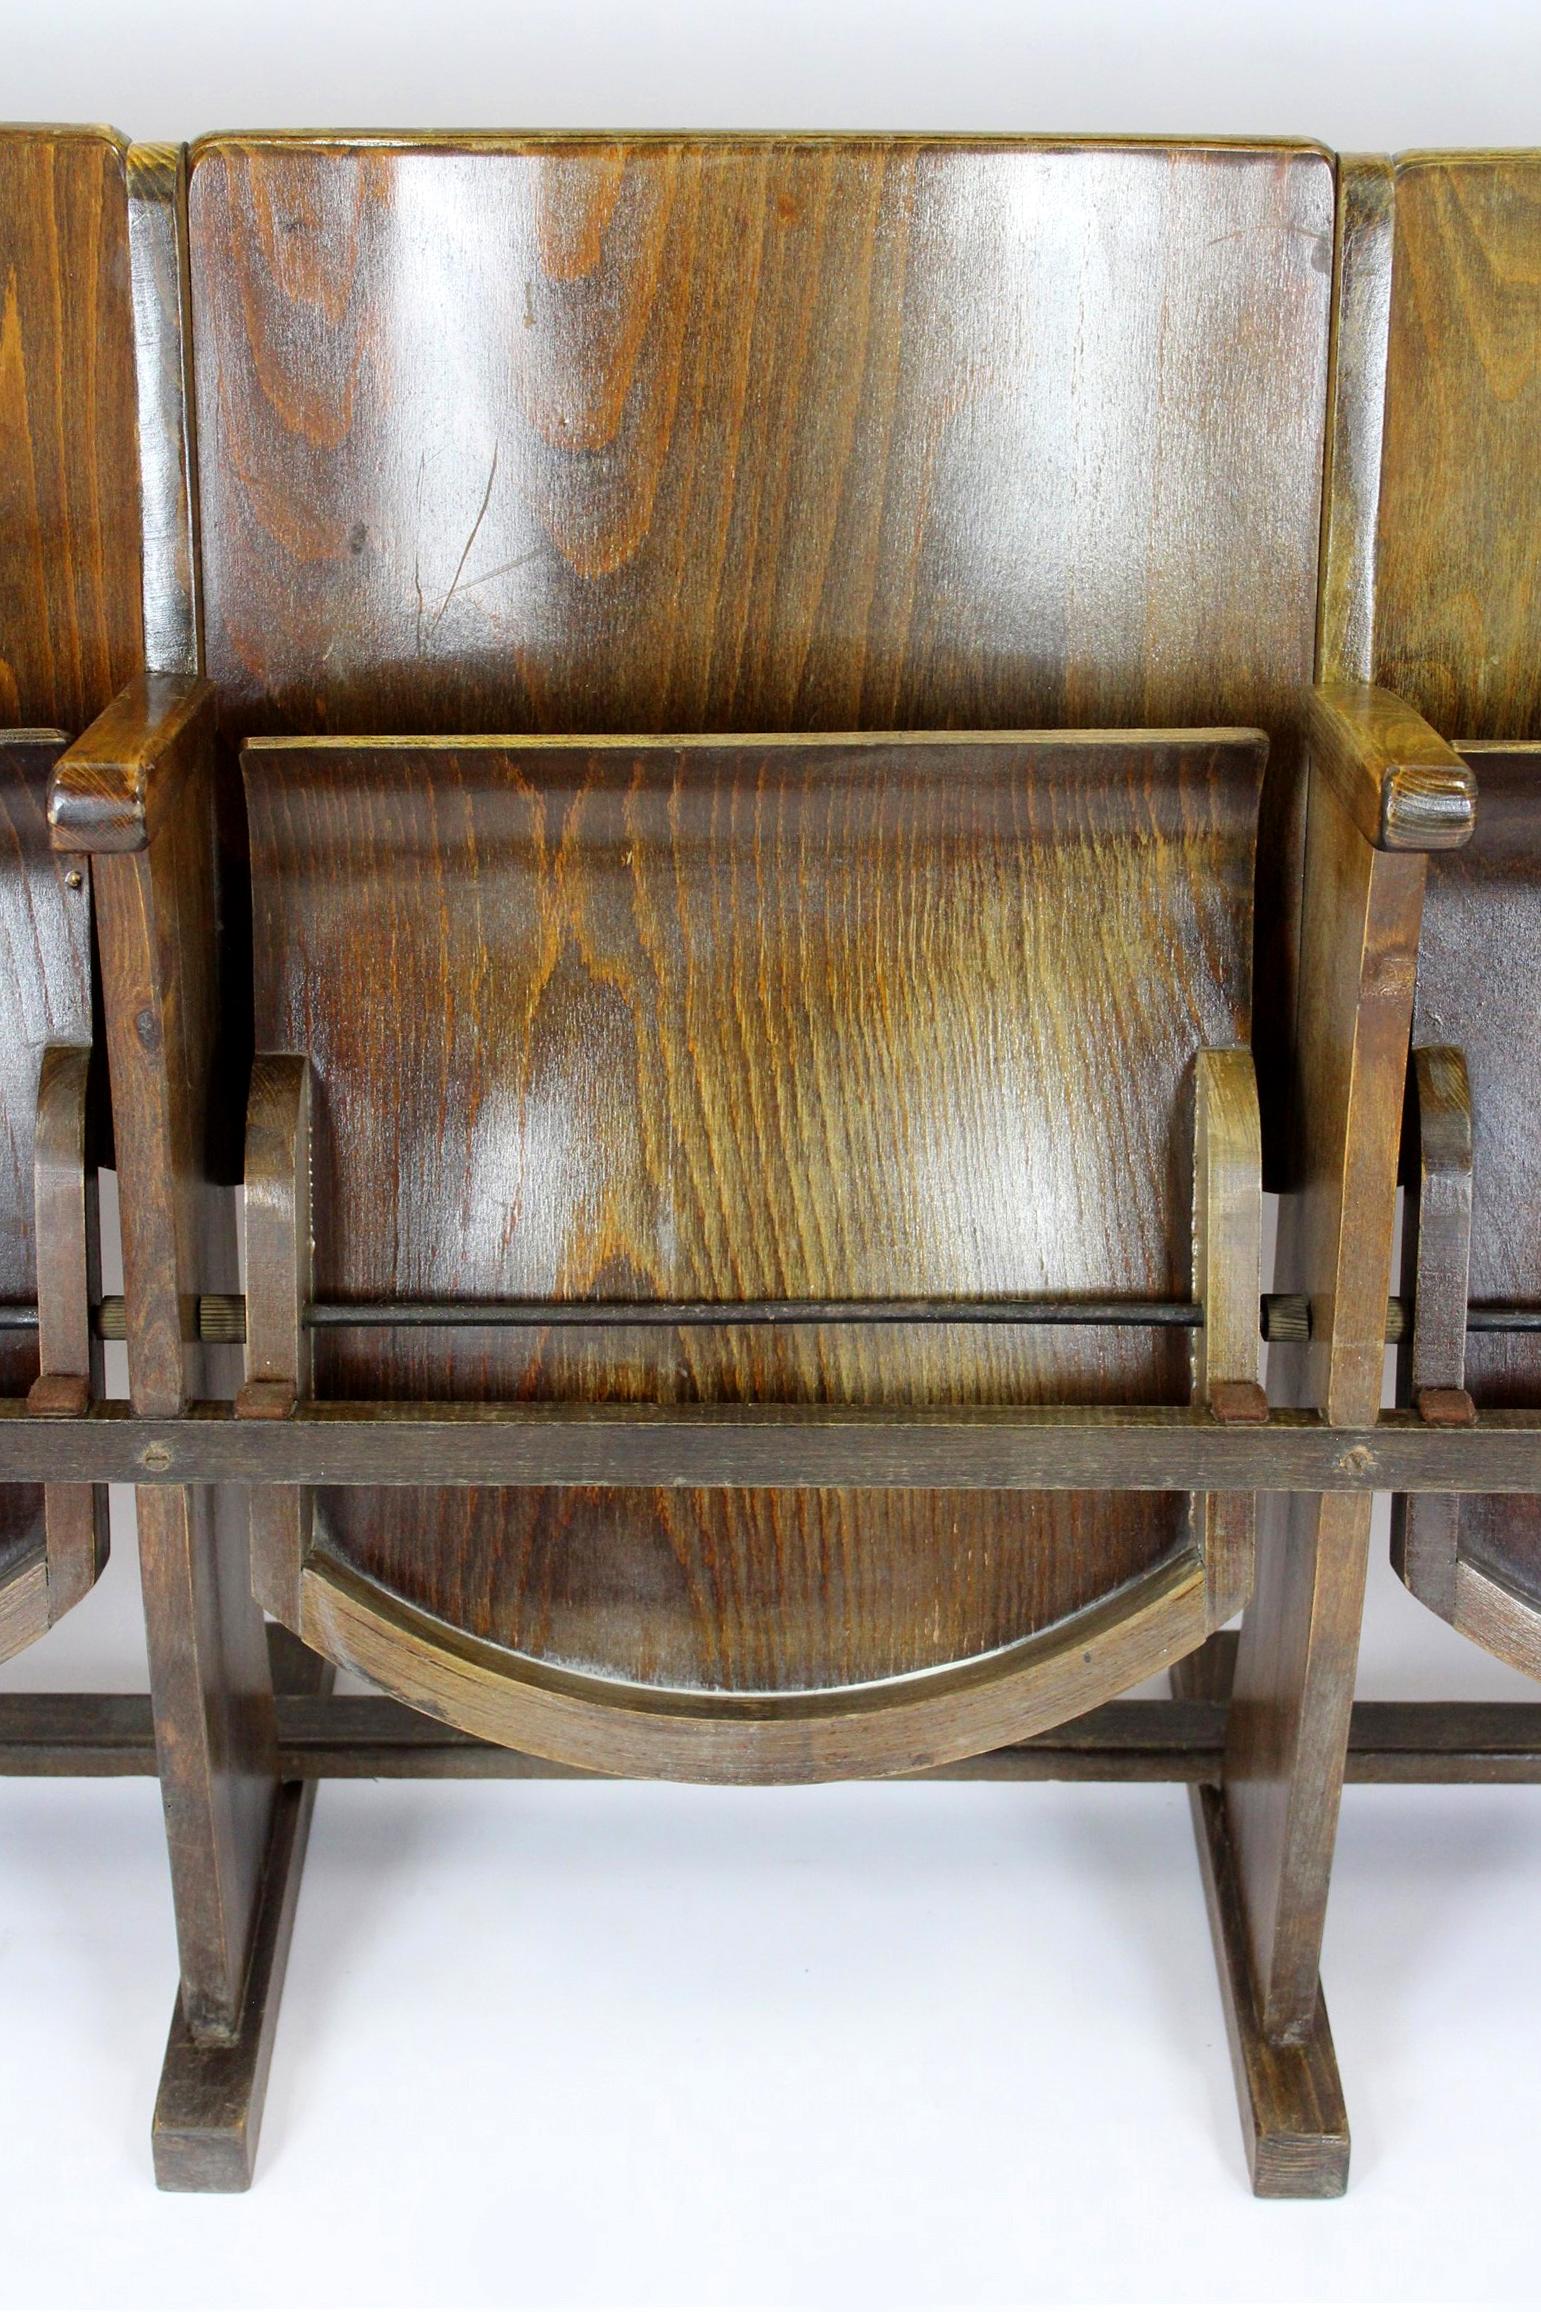 
Original cinema seats manufactured by TON (formerly Thonet) in the 1960s. Made of beech wood and bent plywood. Preserved in original, good condition.

Please contact us if you want to buy more pieces, we offer 9 benches.